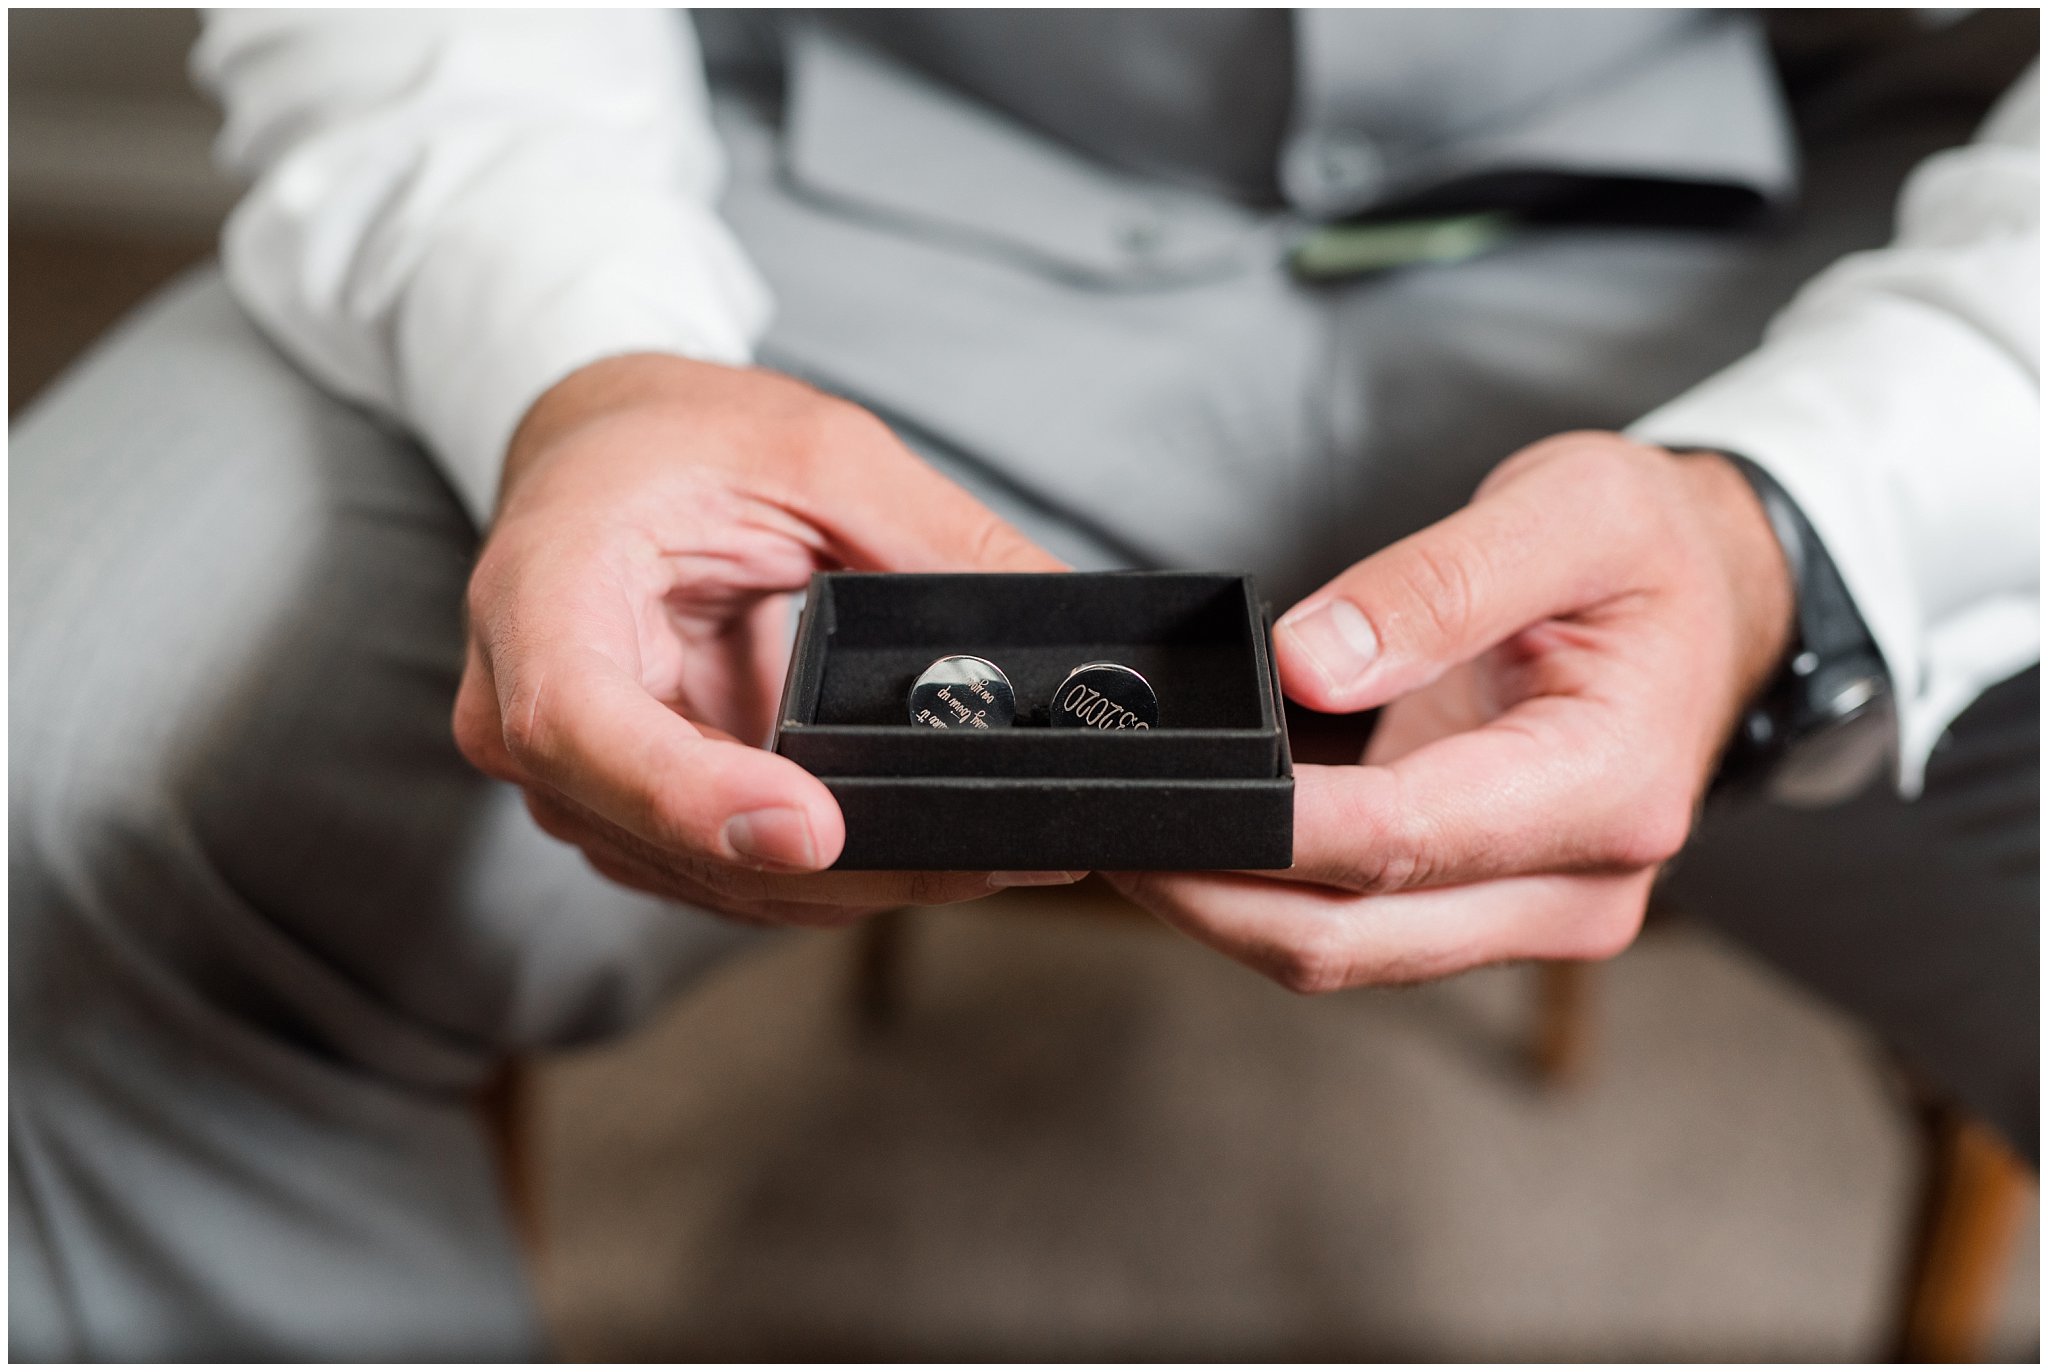 Groom opening gift of custom cufflinks with message | Sage Green and Gray Summer Wedding at Oak Hills | Jessie and Dallin Photography